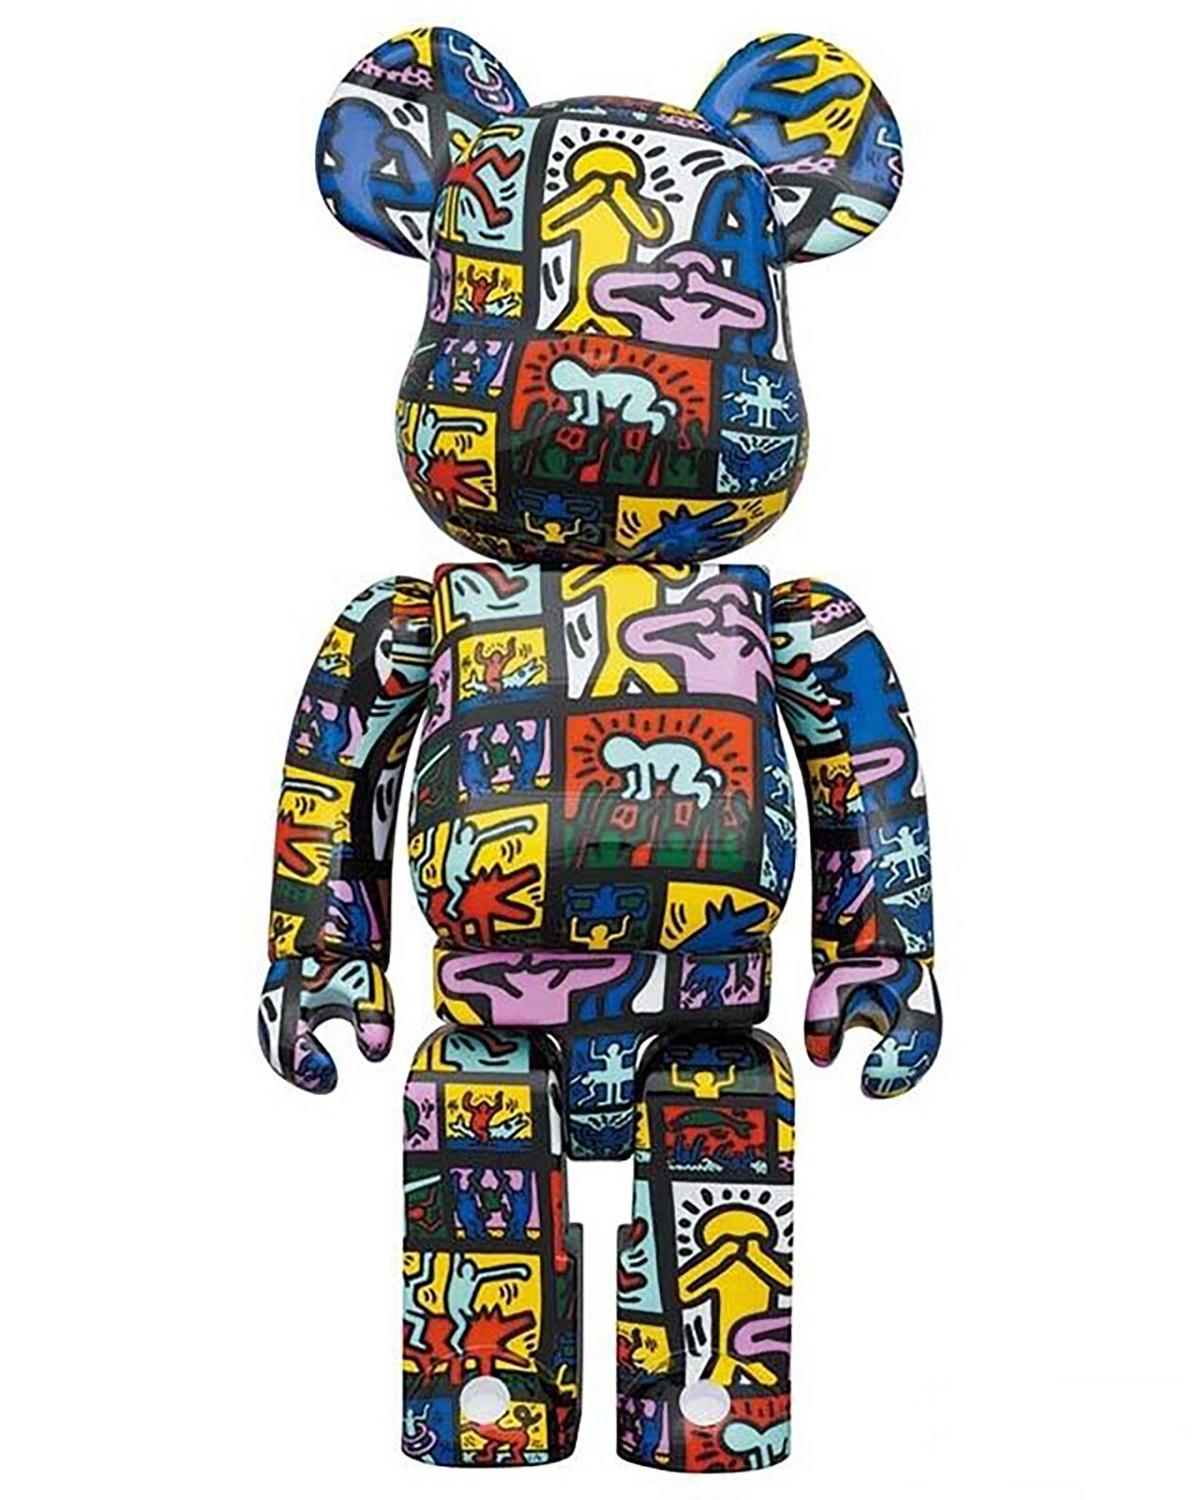 Keith Haring Bearbrick 400%  (Keith Haring BE@RBRICK)  - Street Art Print by (after) Keith Haring